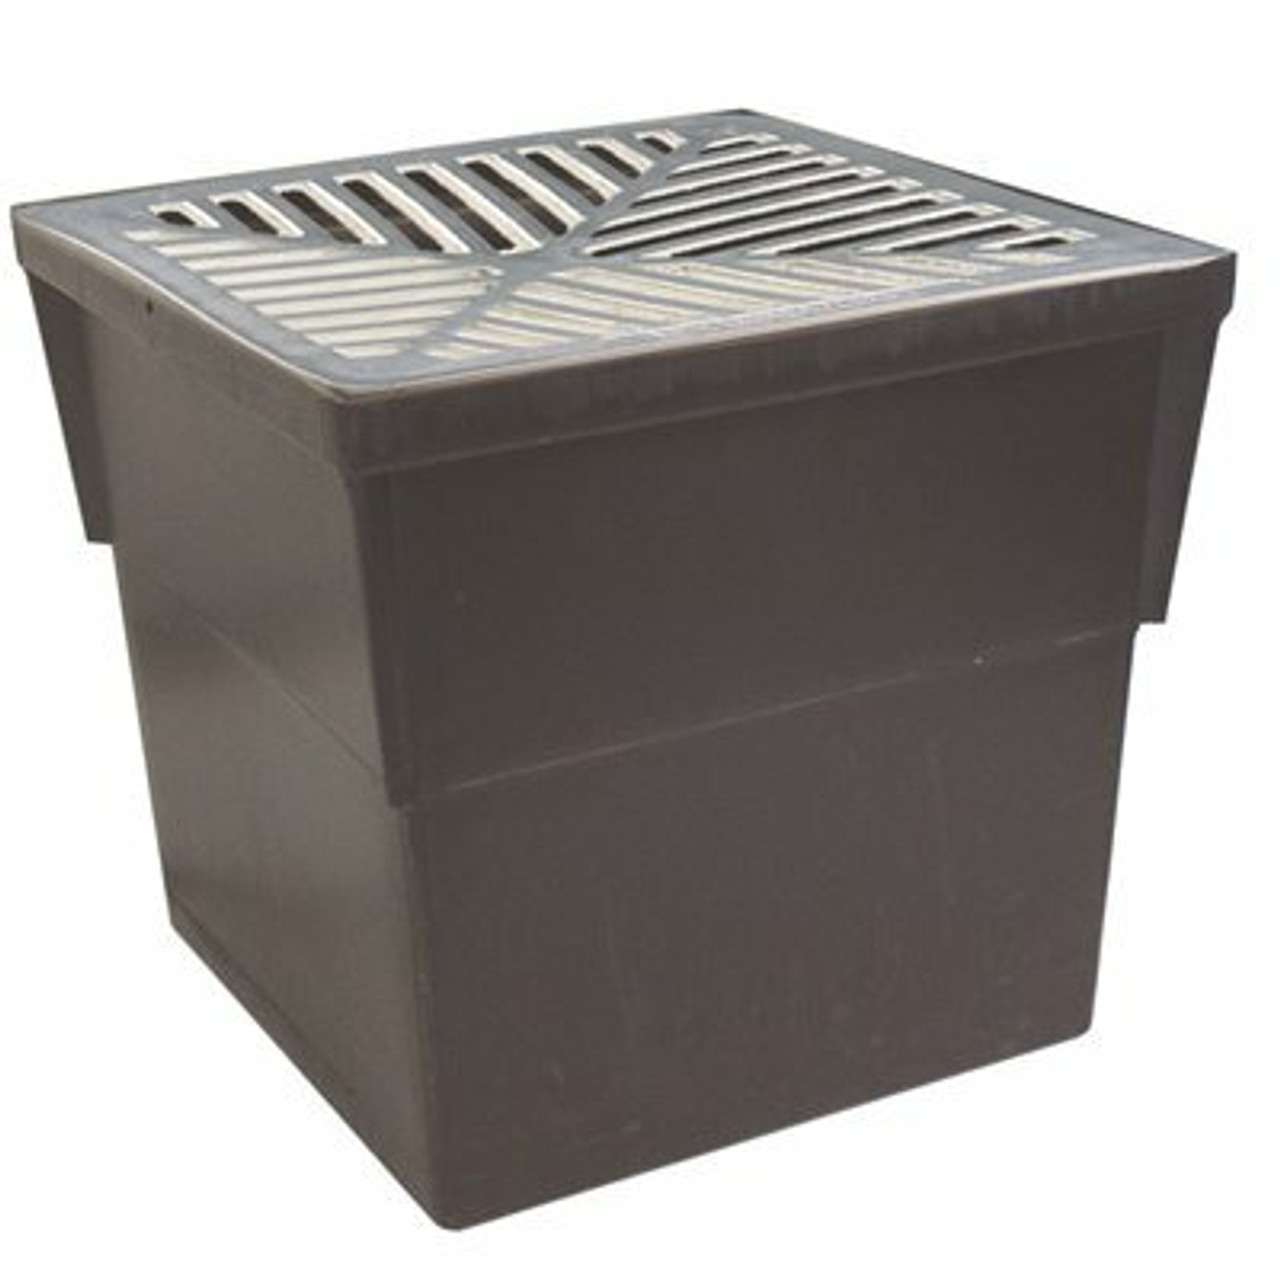 14 In. X 14 In. Storm Water Pit And Catch Basin For Modular Trench And Channel Drain Systems With Aluminum Grate